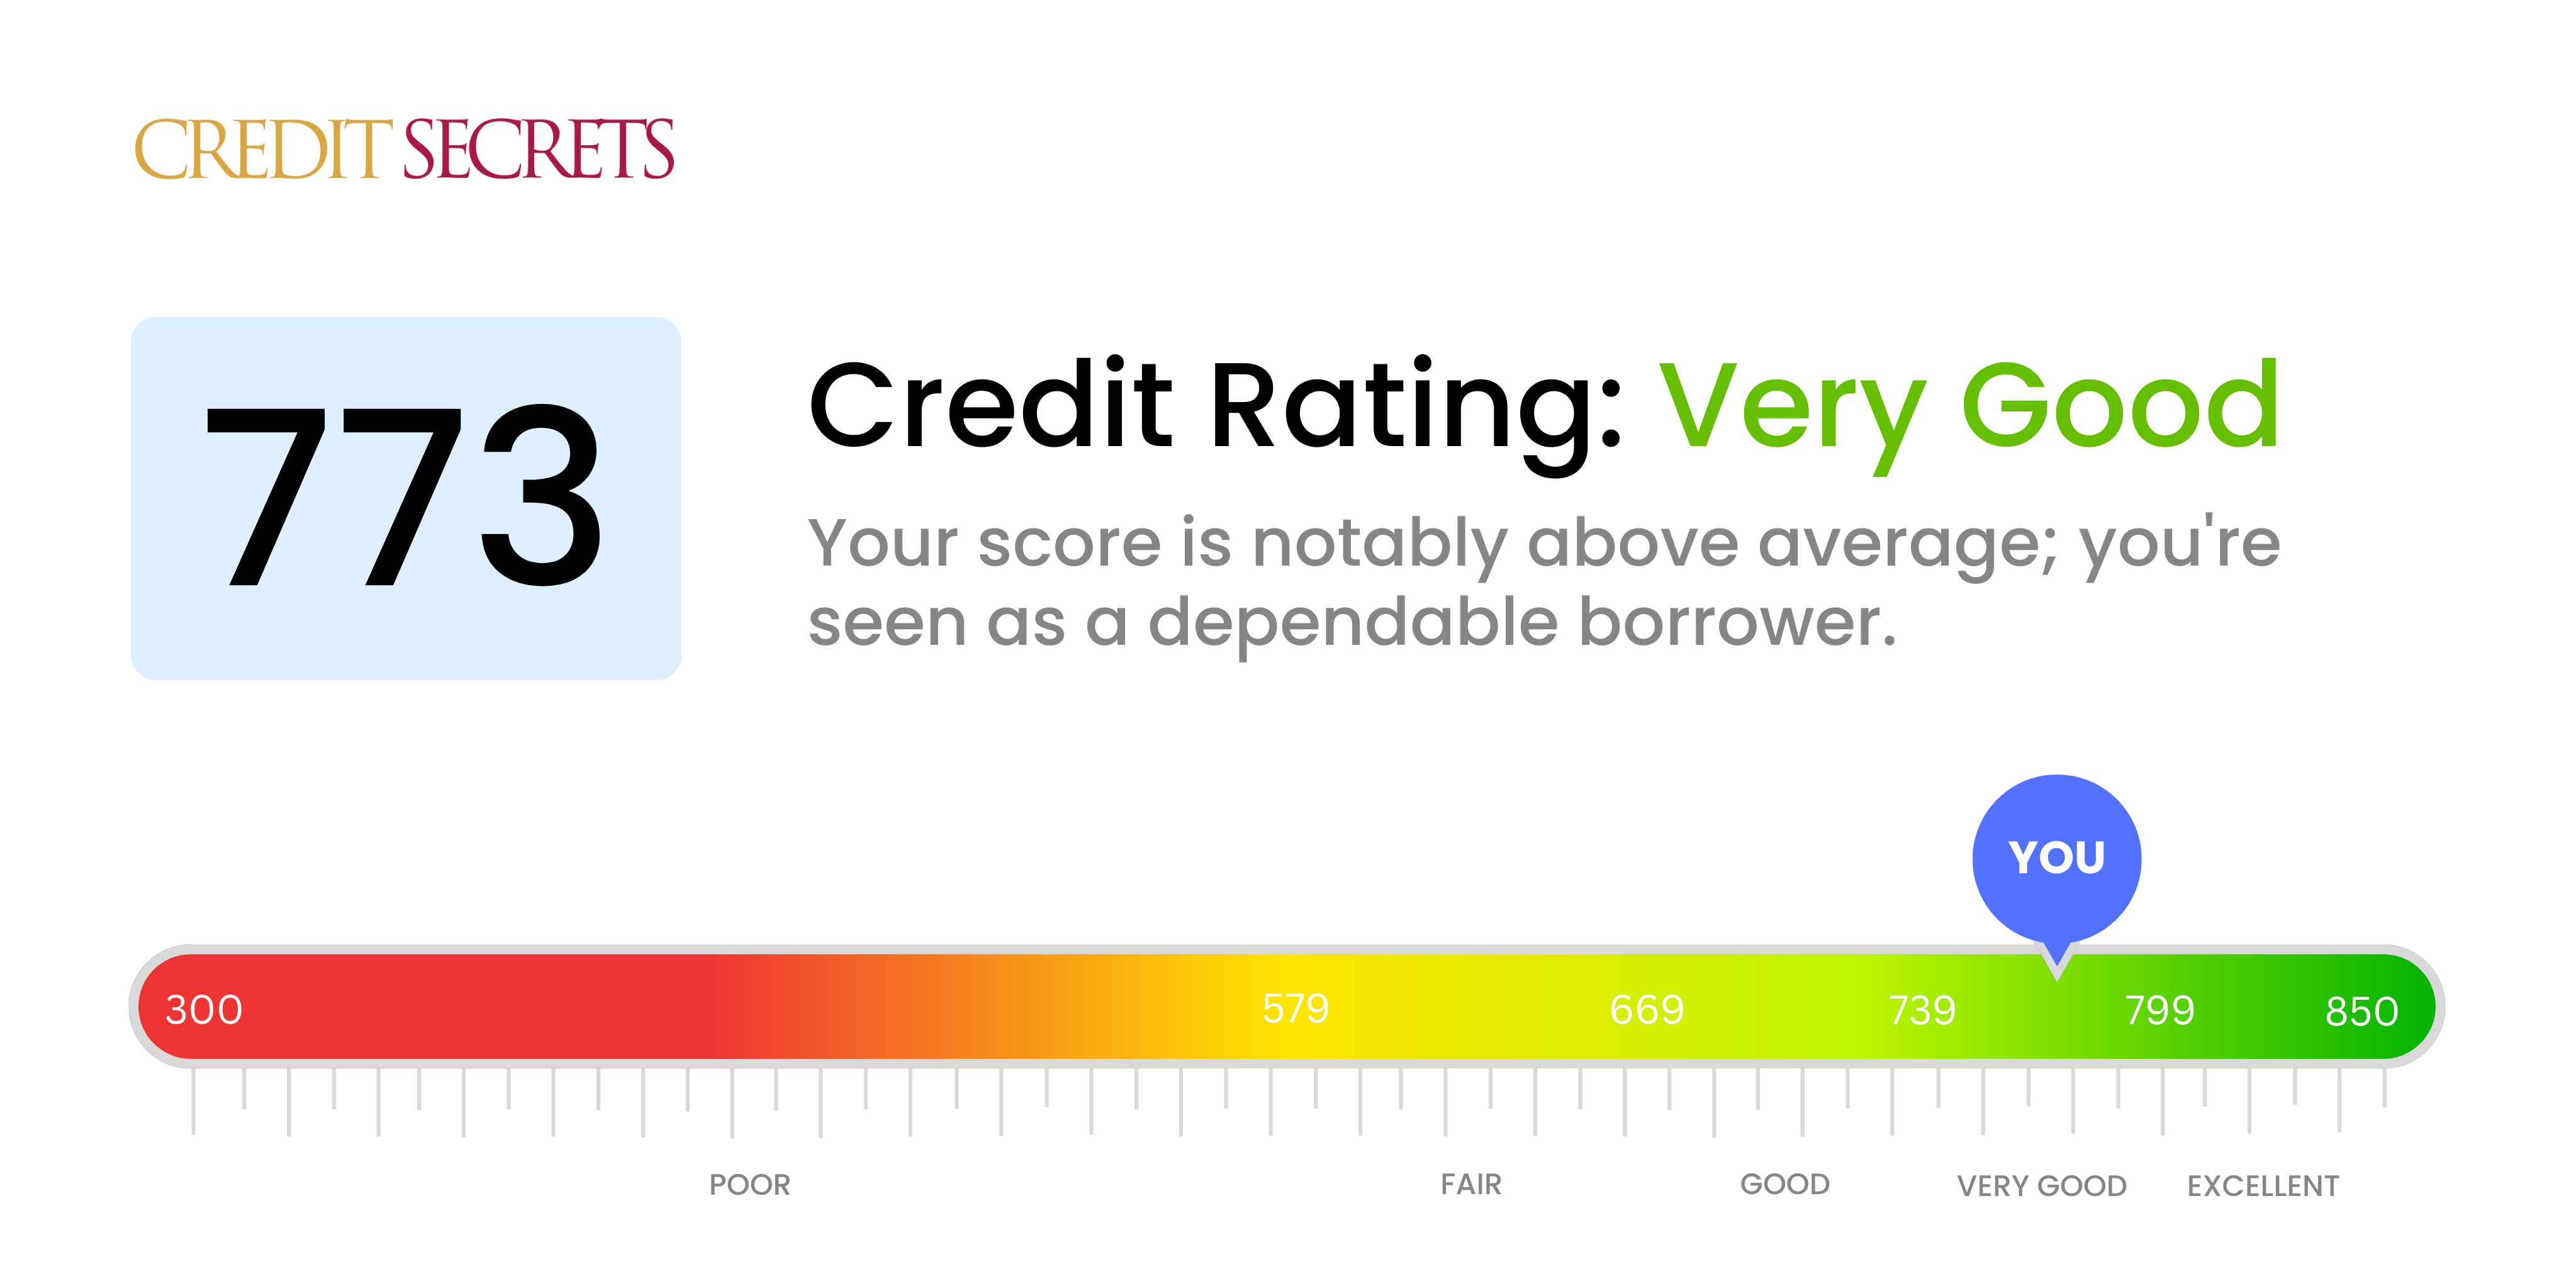 Is 773 a good credit score?